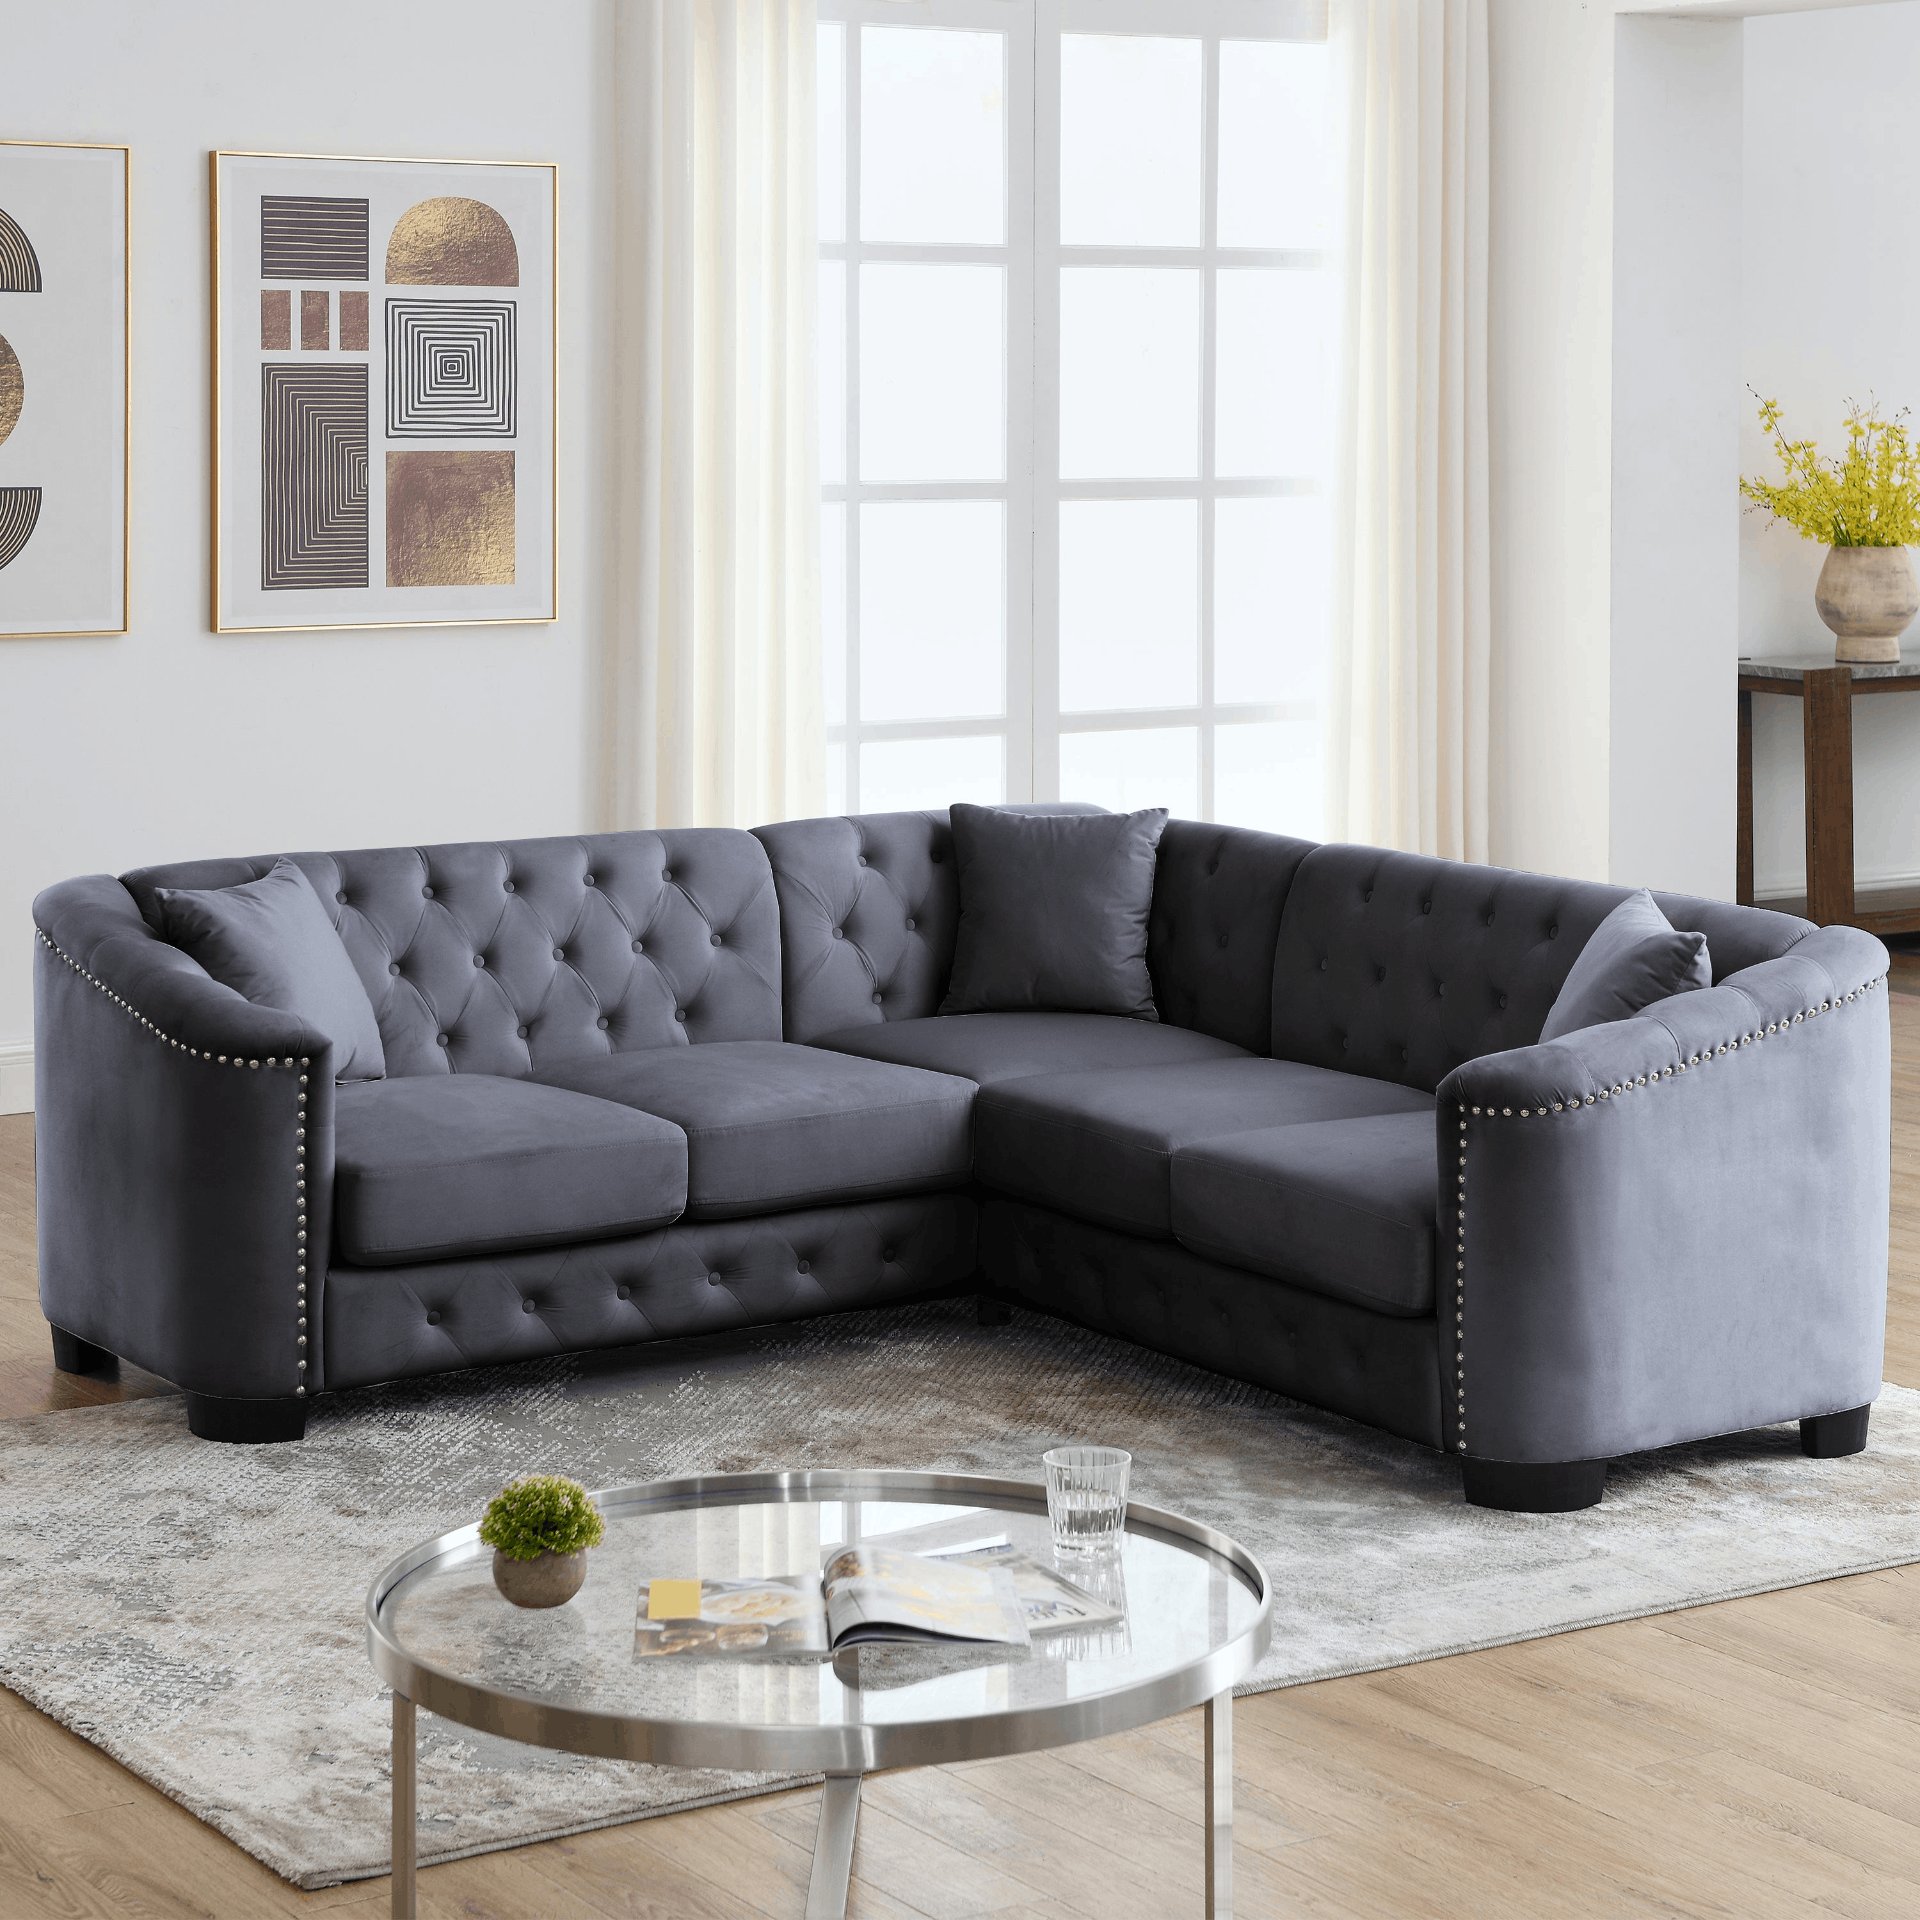 82-Inch Modern Chesterfield Velvet Sofa,Corner Sofa Covers 5 Seat Nail Head Decor L-Shaped Sectional Couch,   5-Seater Corner Sofas with 3 Cushions for Living Room, Bedroom, Apartment 